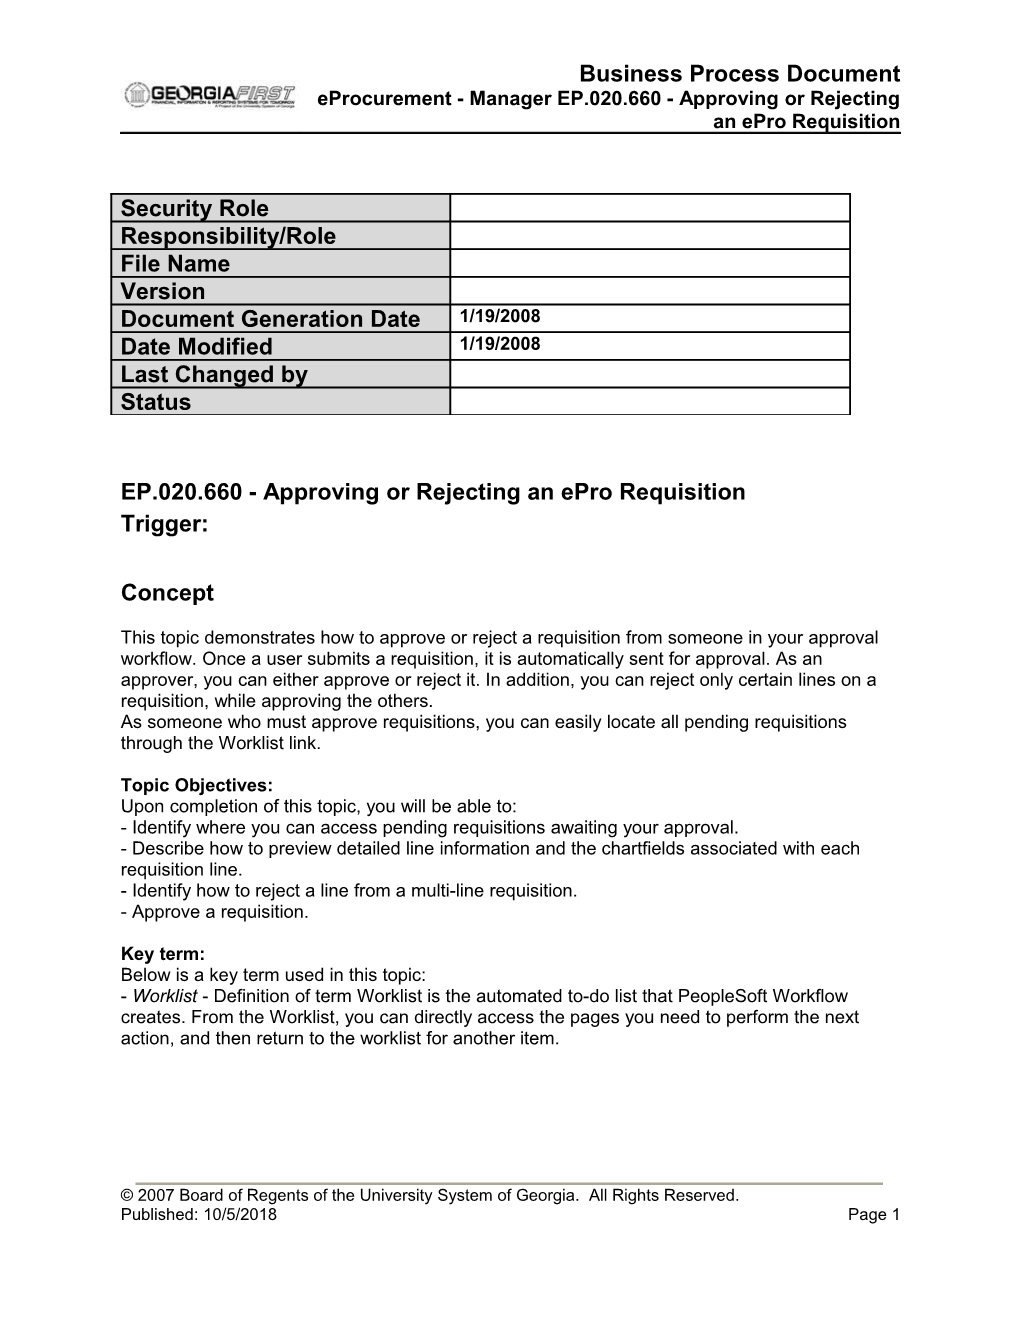 EP 020 660 - Approving Or Rejecting an Epro Requisition